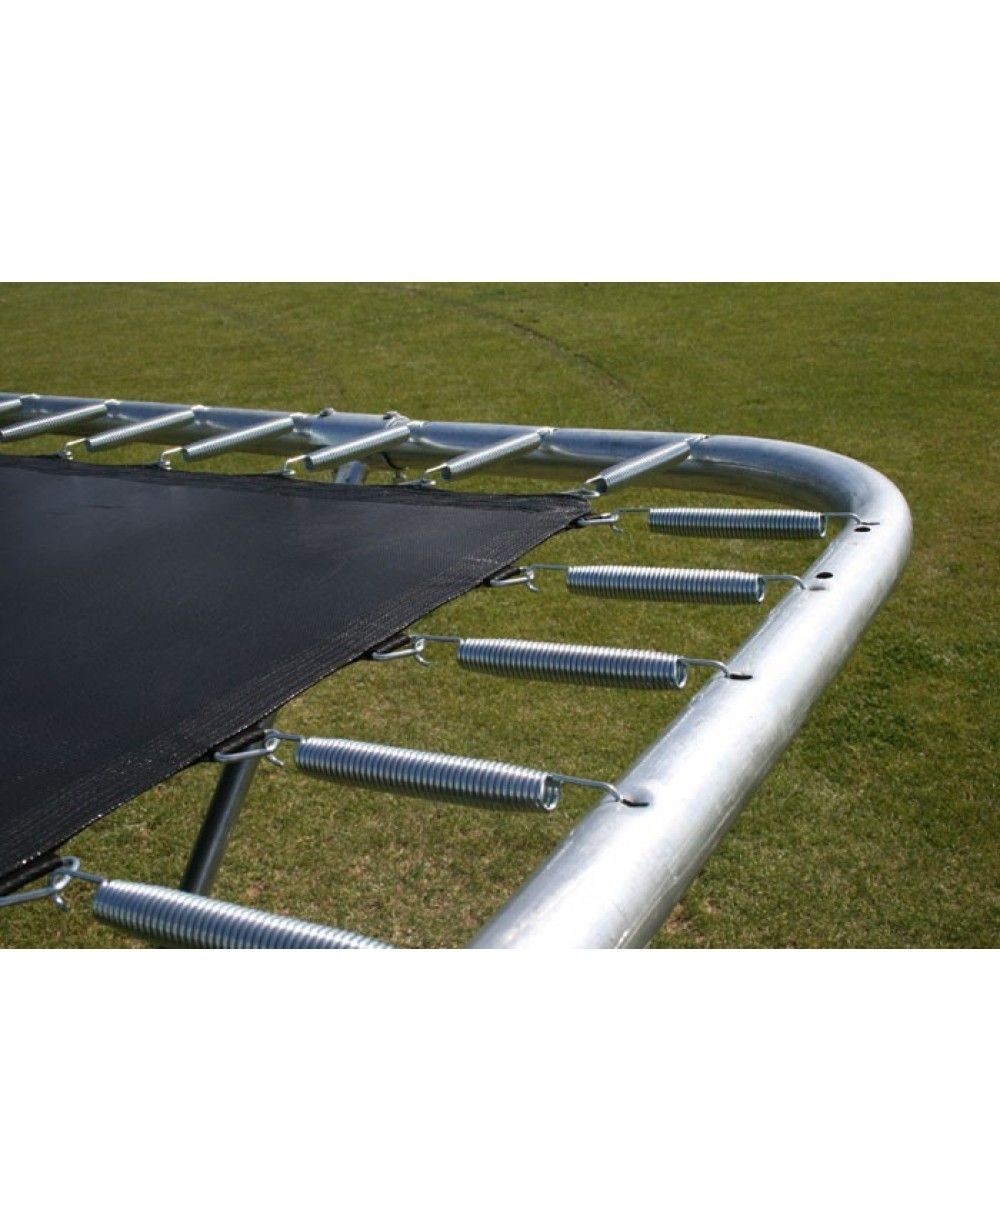 Happy trampoline offers reasonable price on purchasing of